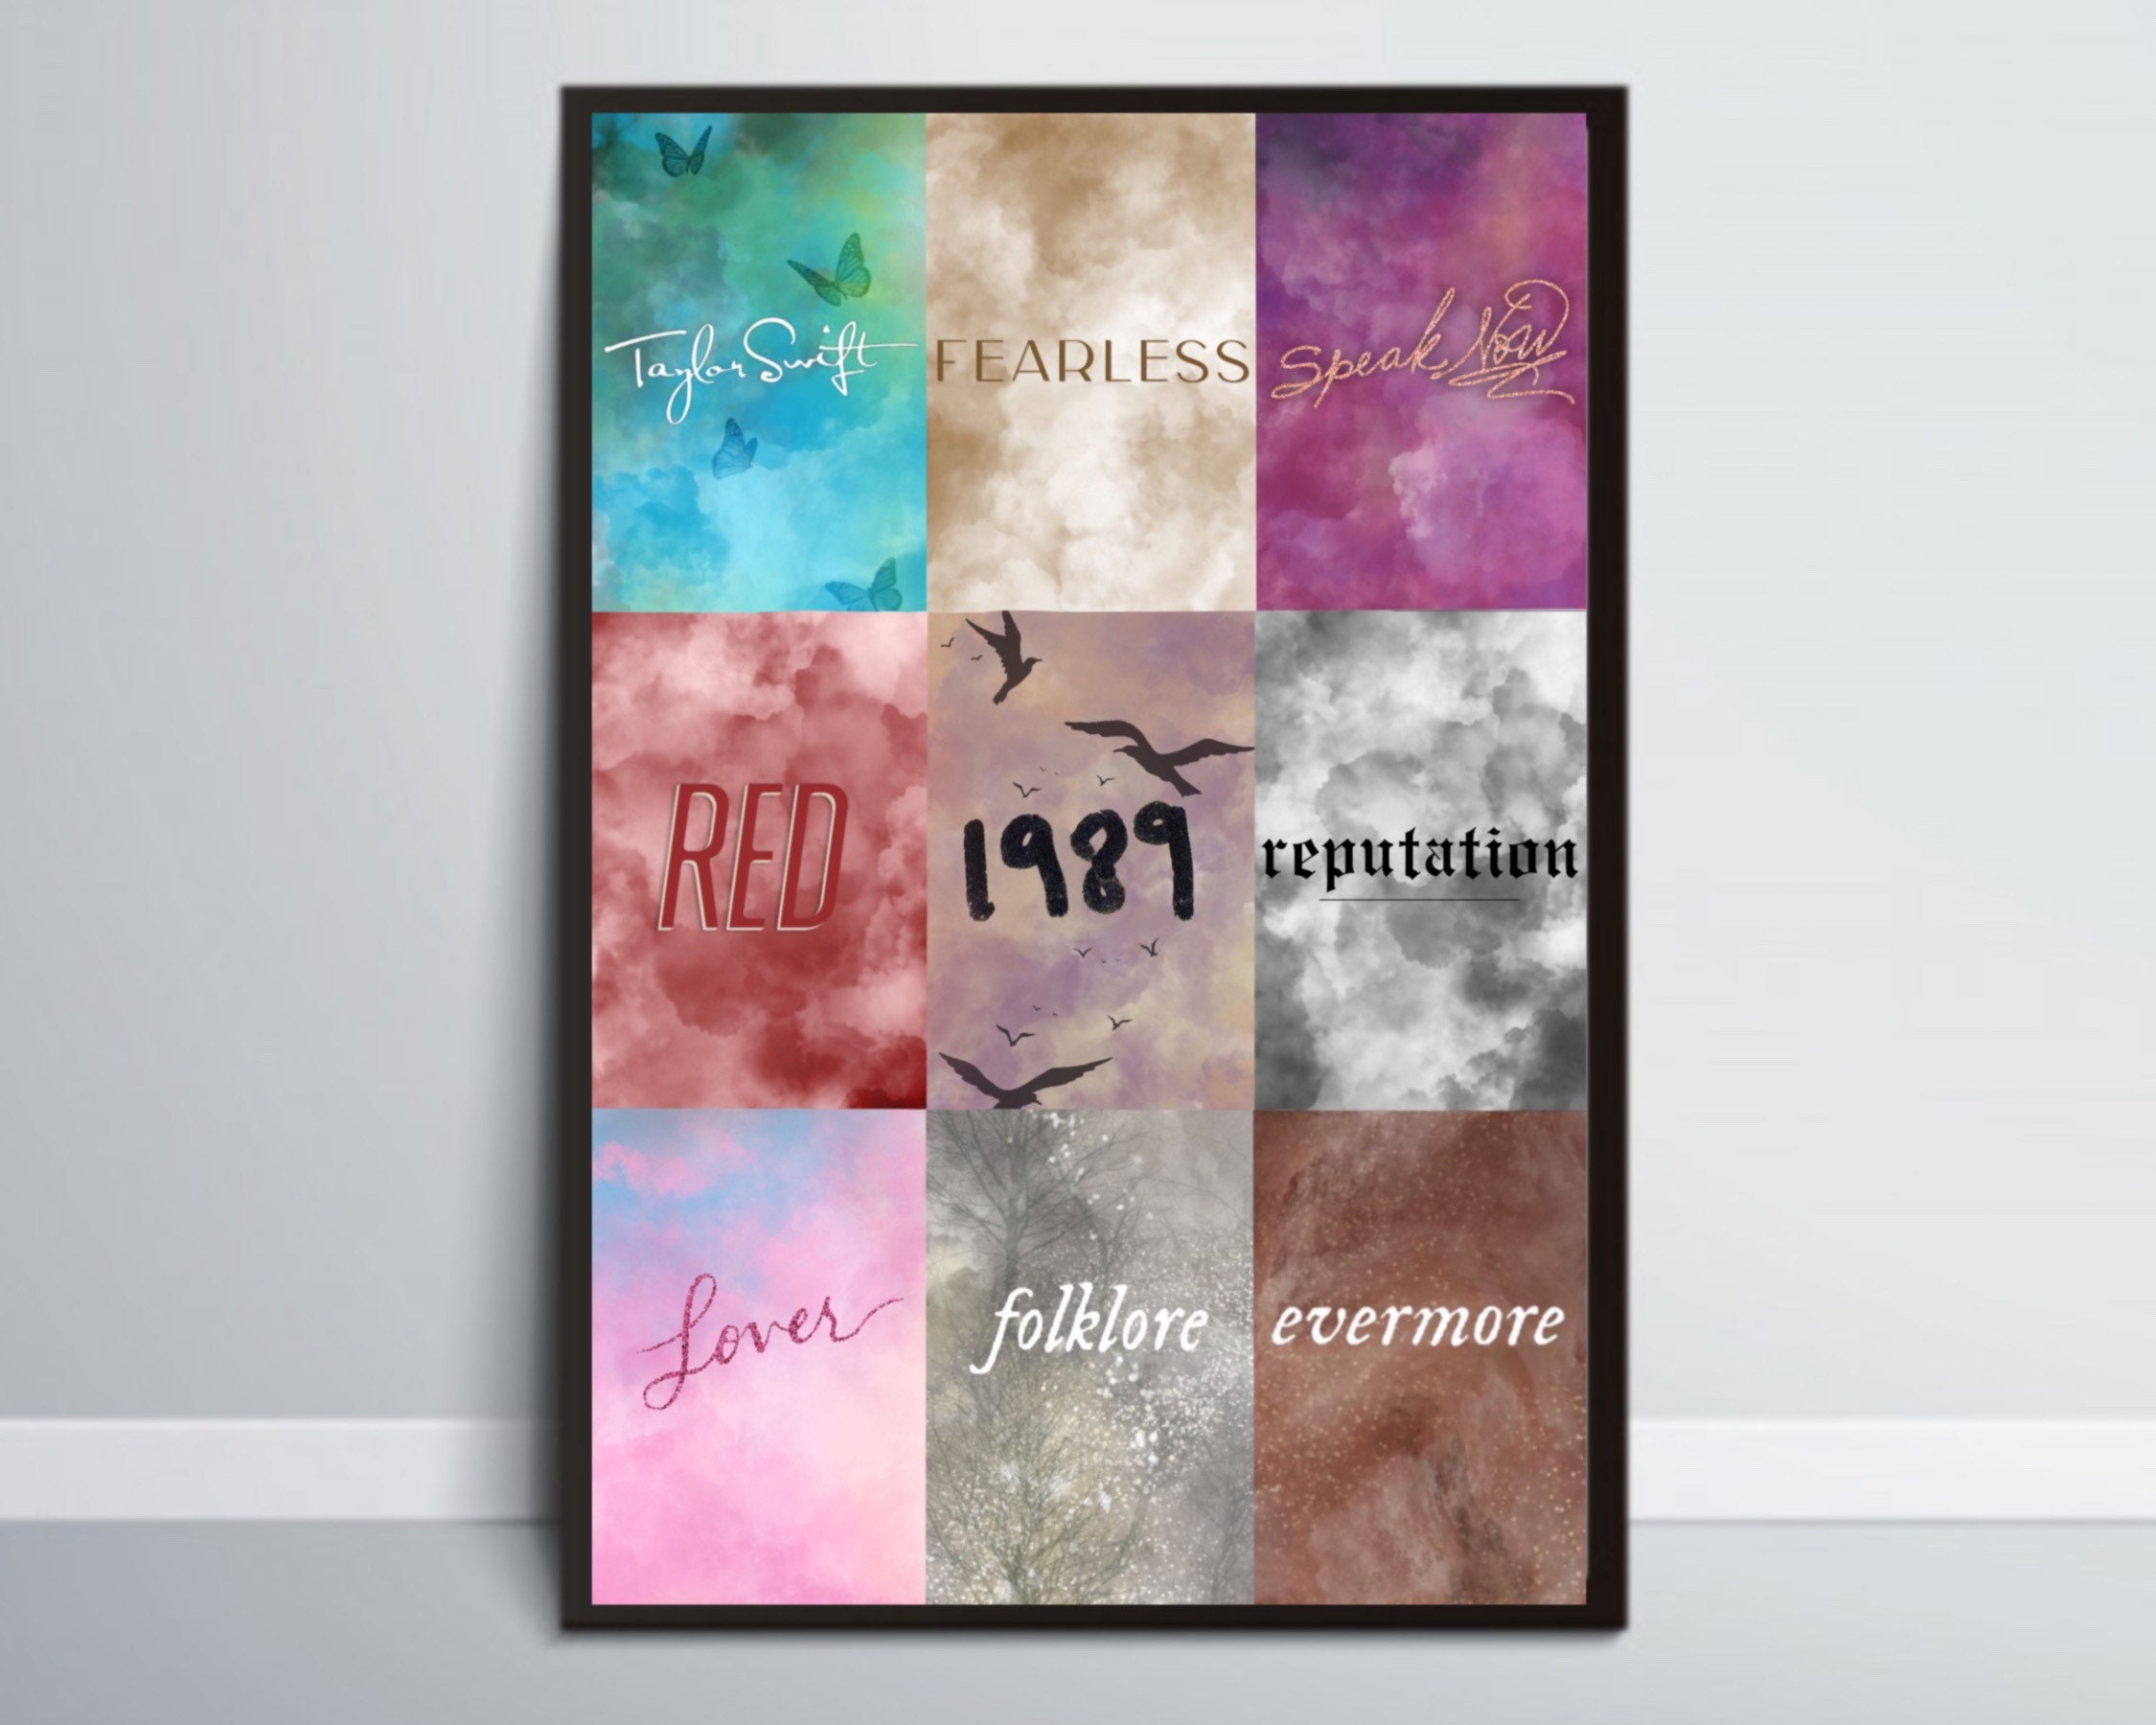 Taylor%Swift Poster Album Cover Print Decor for Room Bedroom Wall